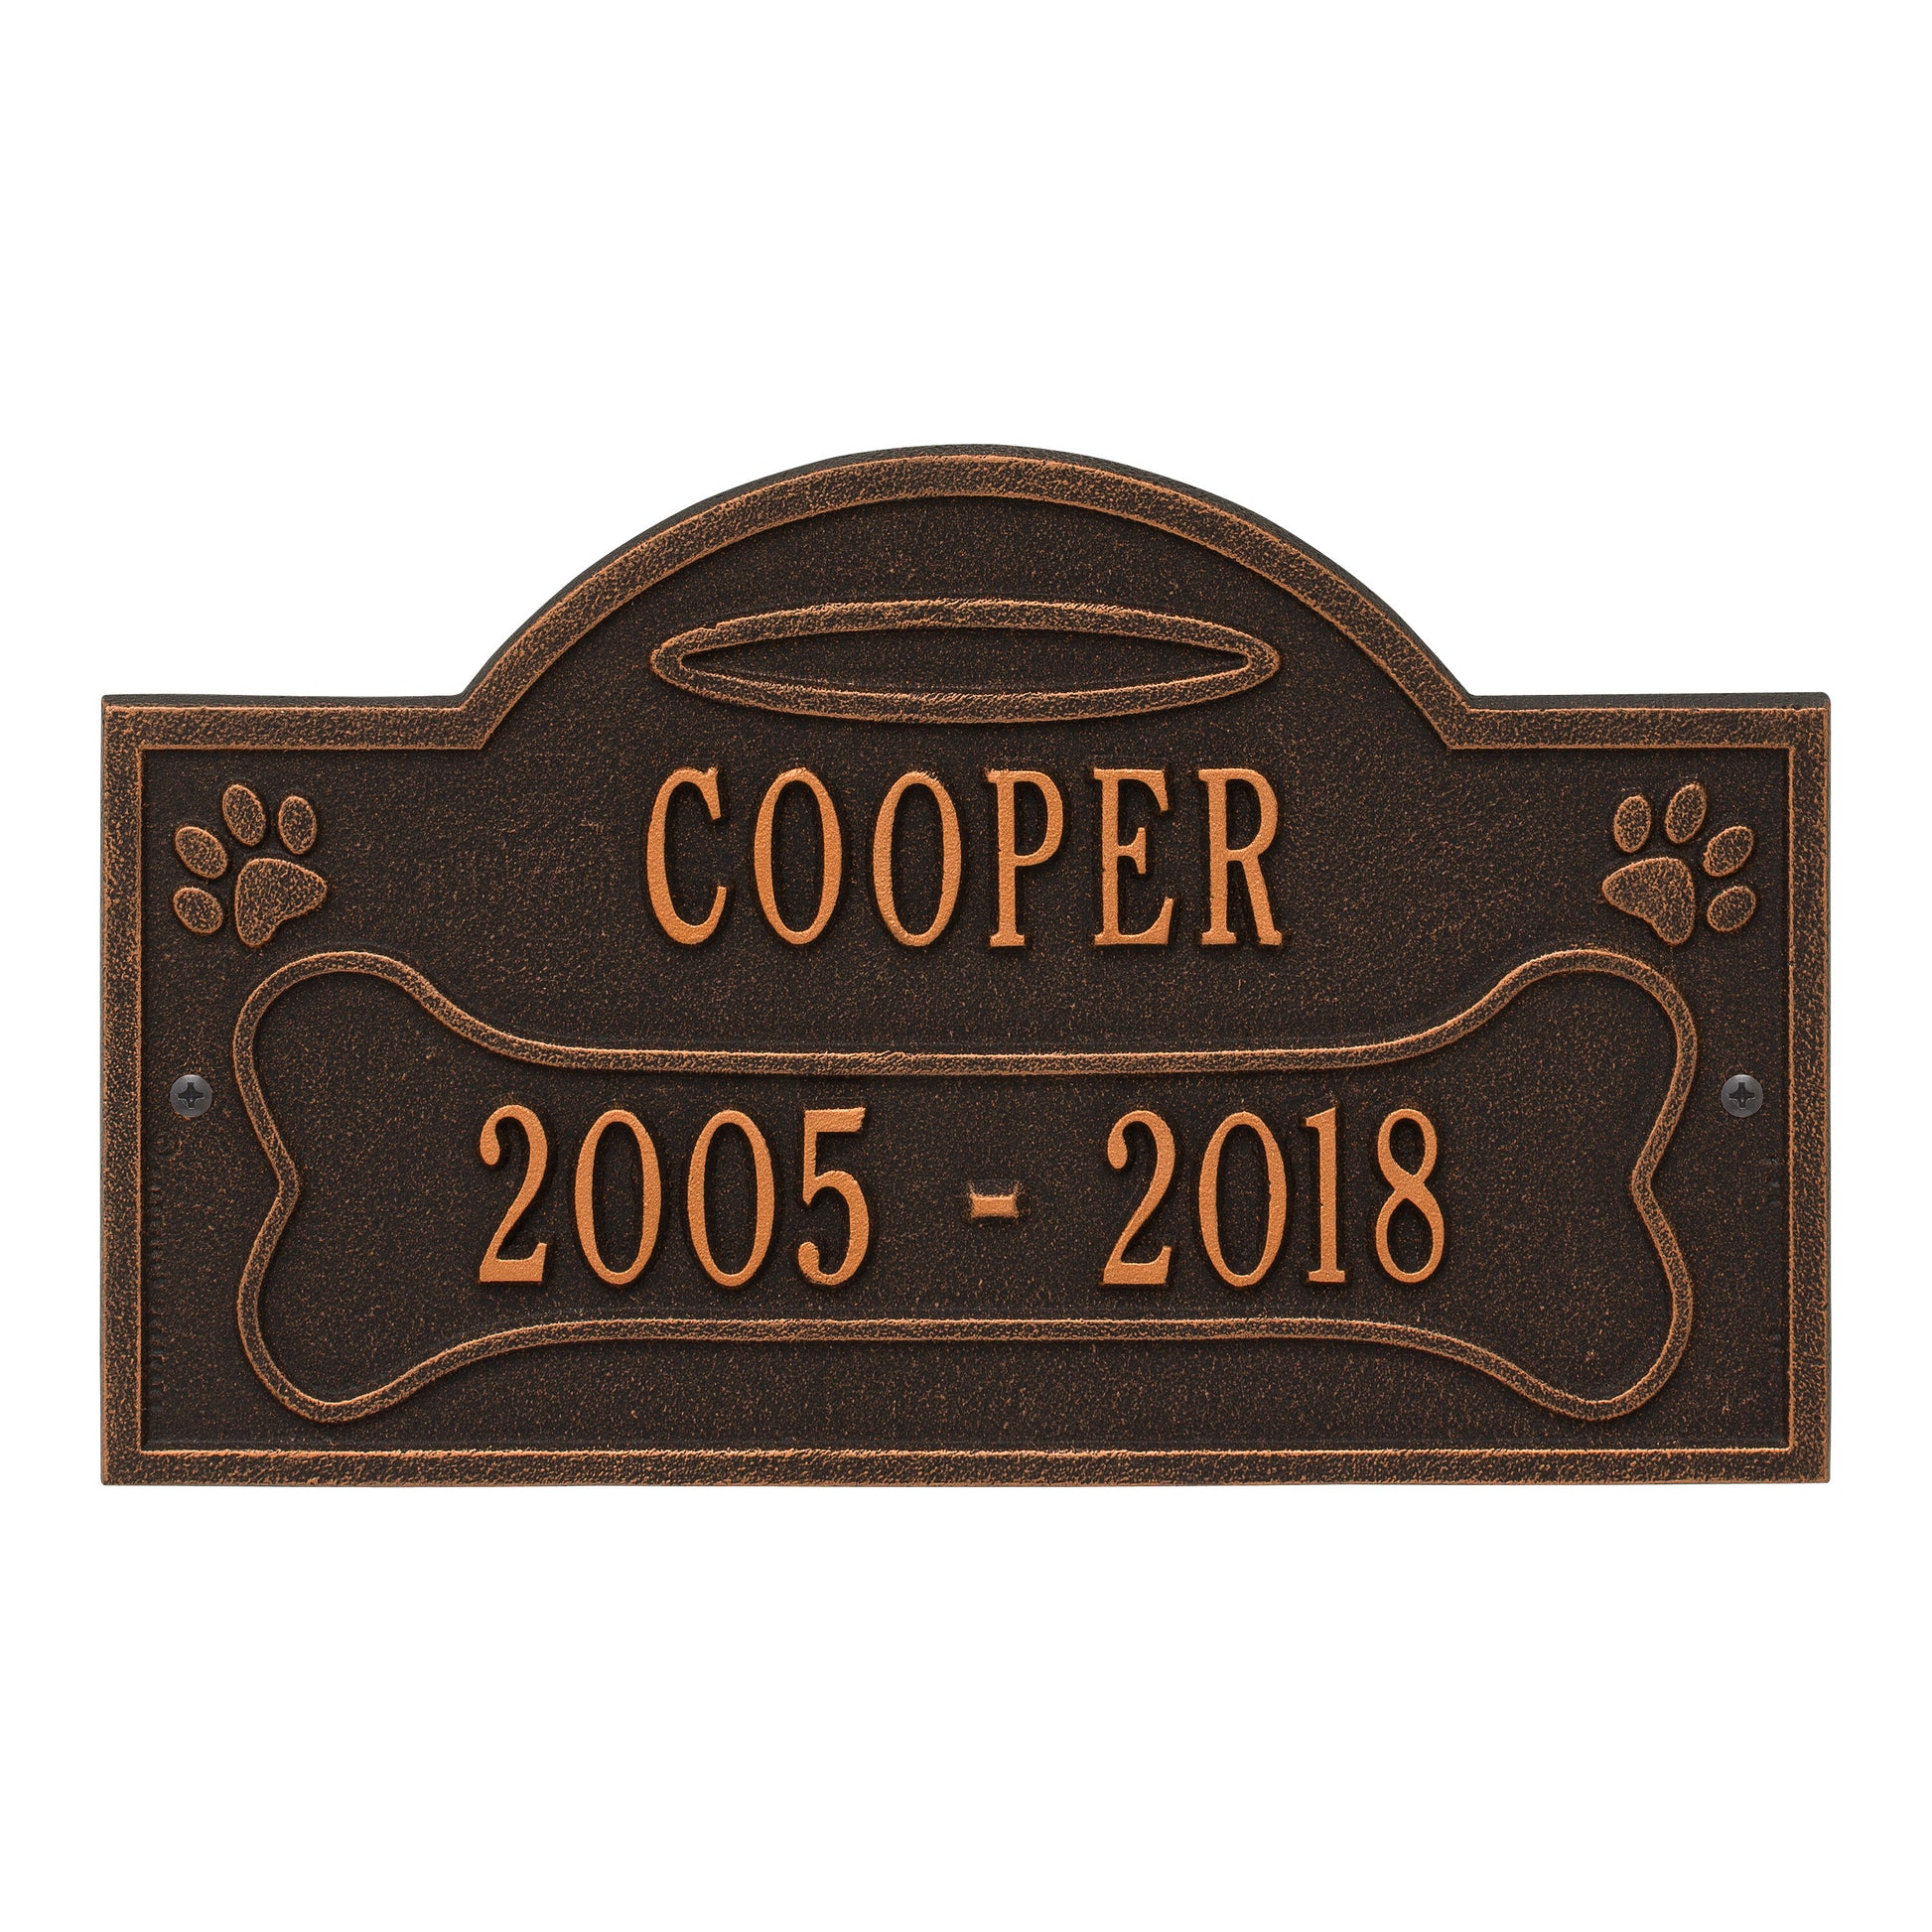 Whitehall Products All Dogs Go To Heaven Pet Memorial Personalized Wall Or Ground Plaque Two Lines 